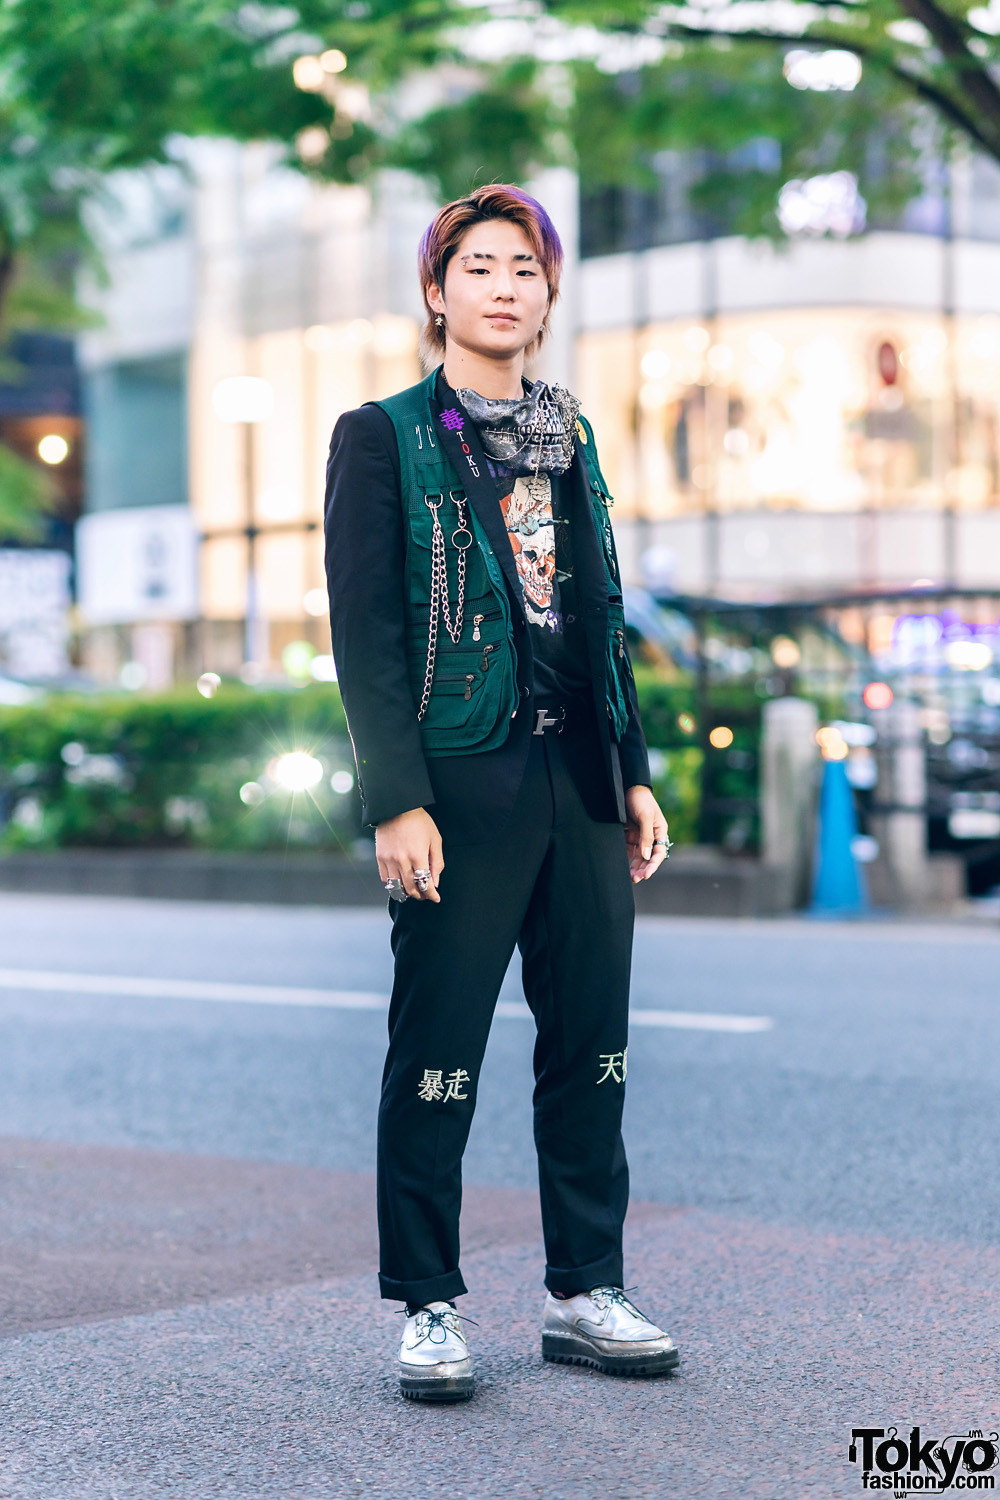 Tokyo Men's Street Style w/ Colored Hair, Skull Mask, Utility Vest, Graphic Shirt, Cuffed Pants, Casio Watch, Spinns & John Lawrence Sullivan Shoes